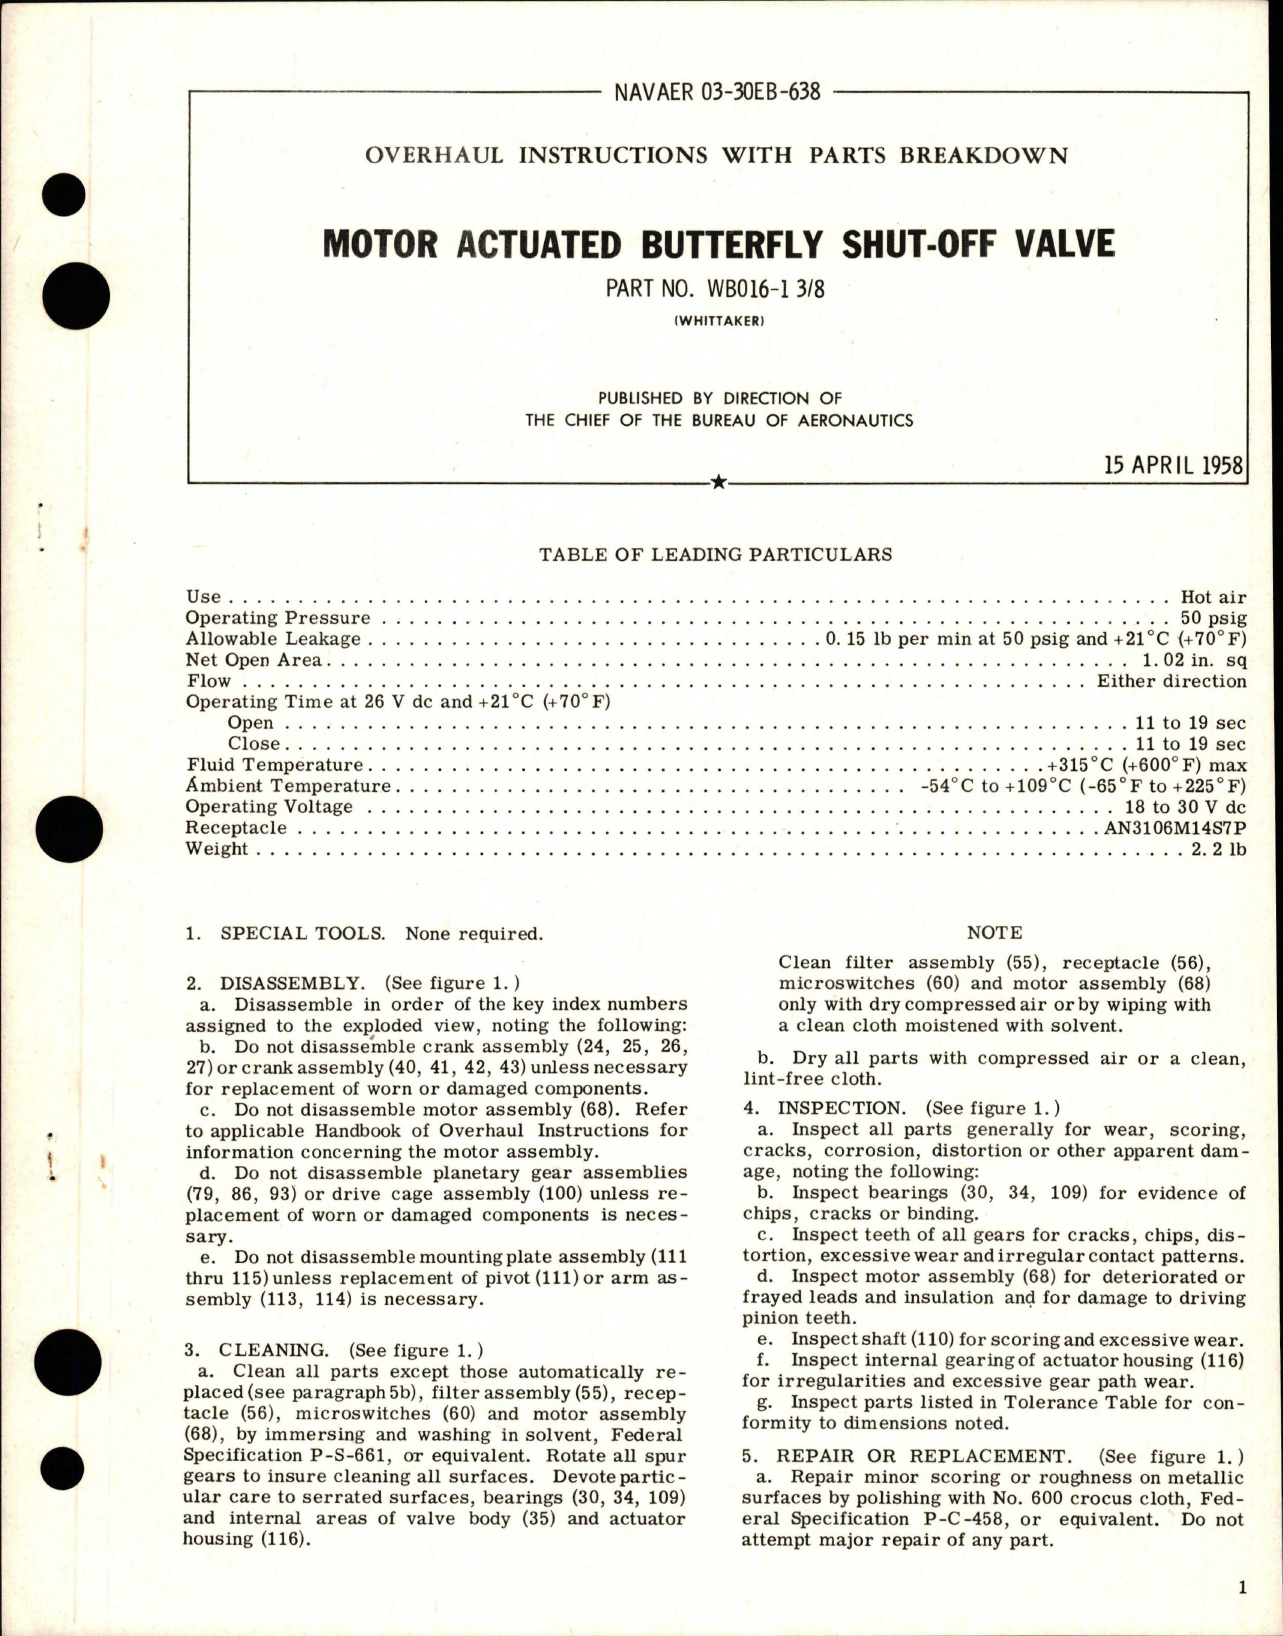 Sample page 1 from AirCorps Library document: Overhaul Instructions with Parts Breakdown for Motor Actuated Butterfly Shut-Off Valve - Part WB016-1 3/8